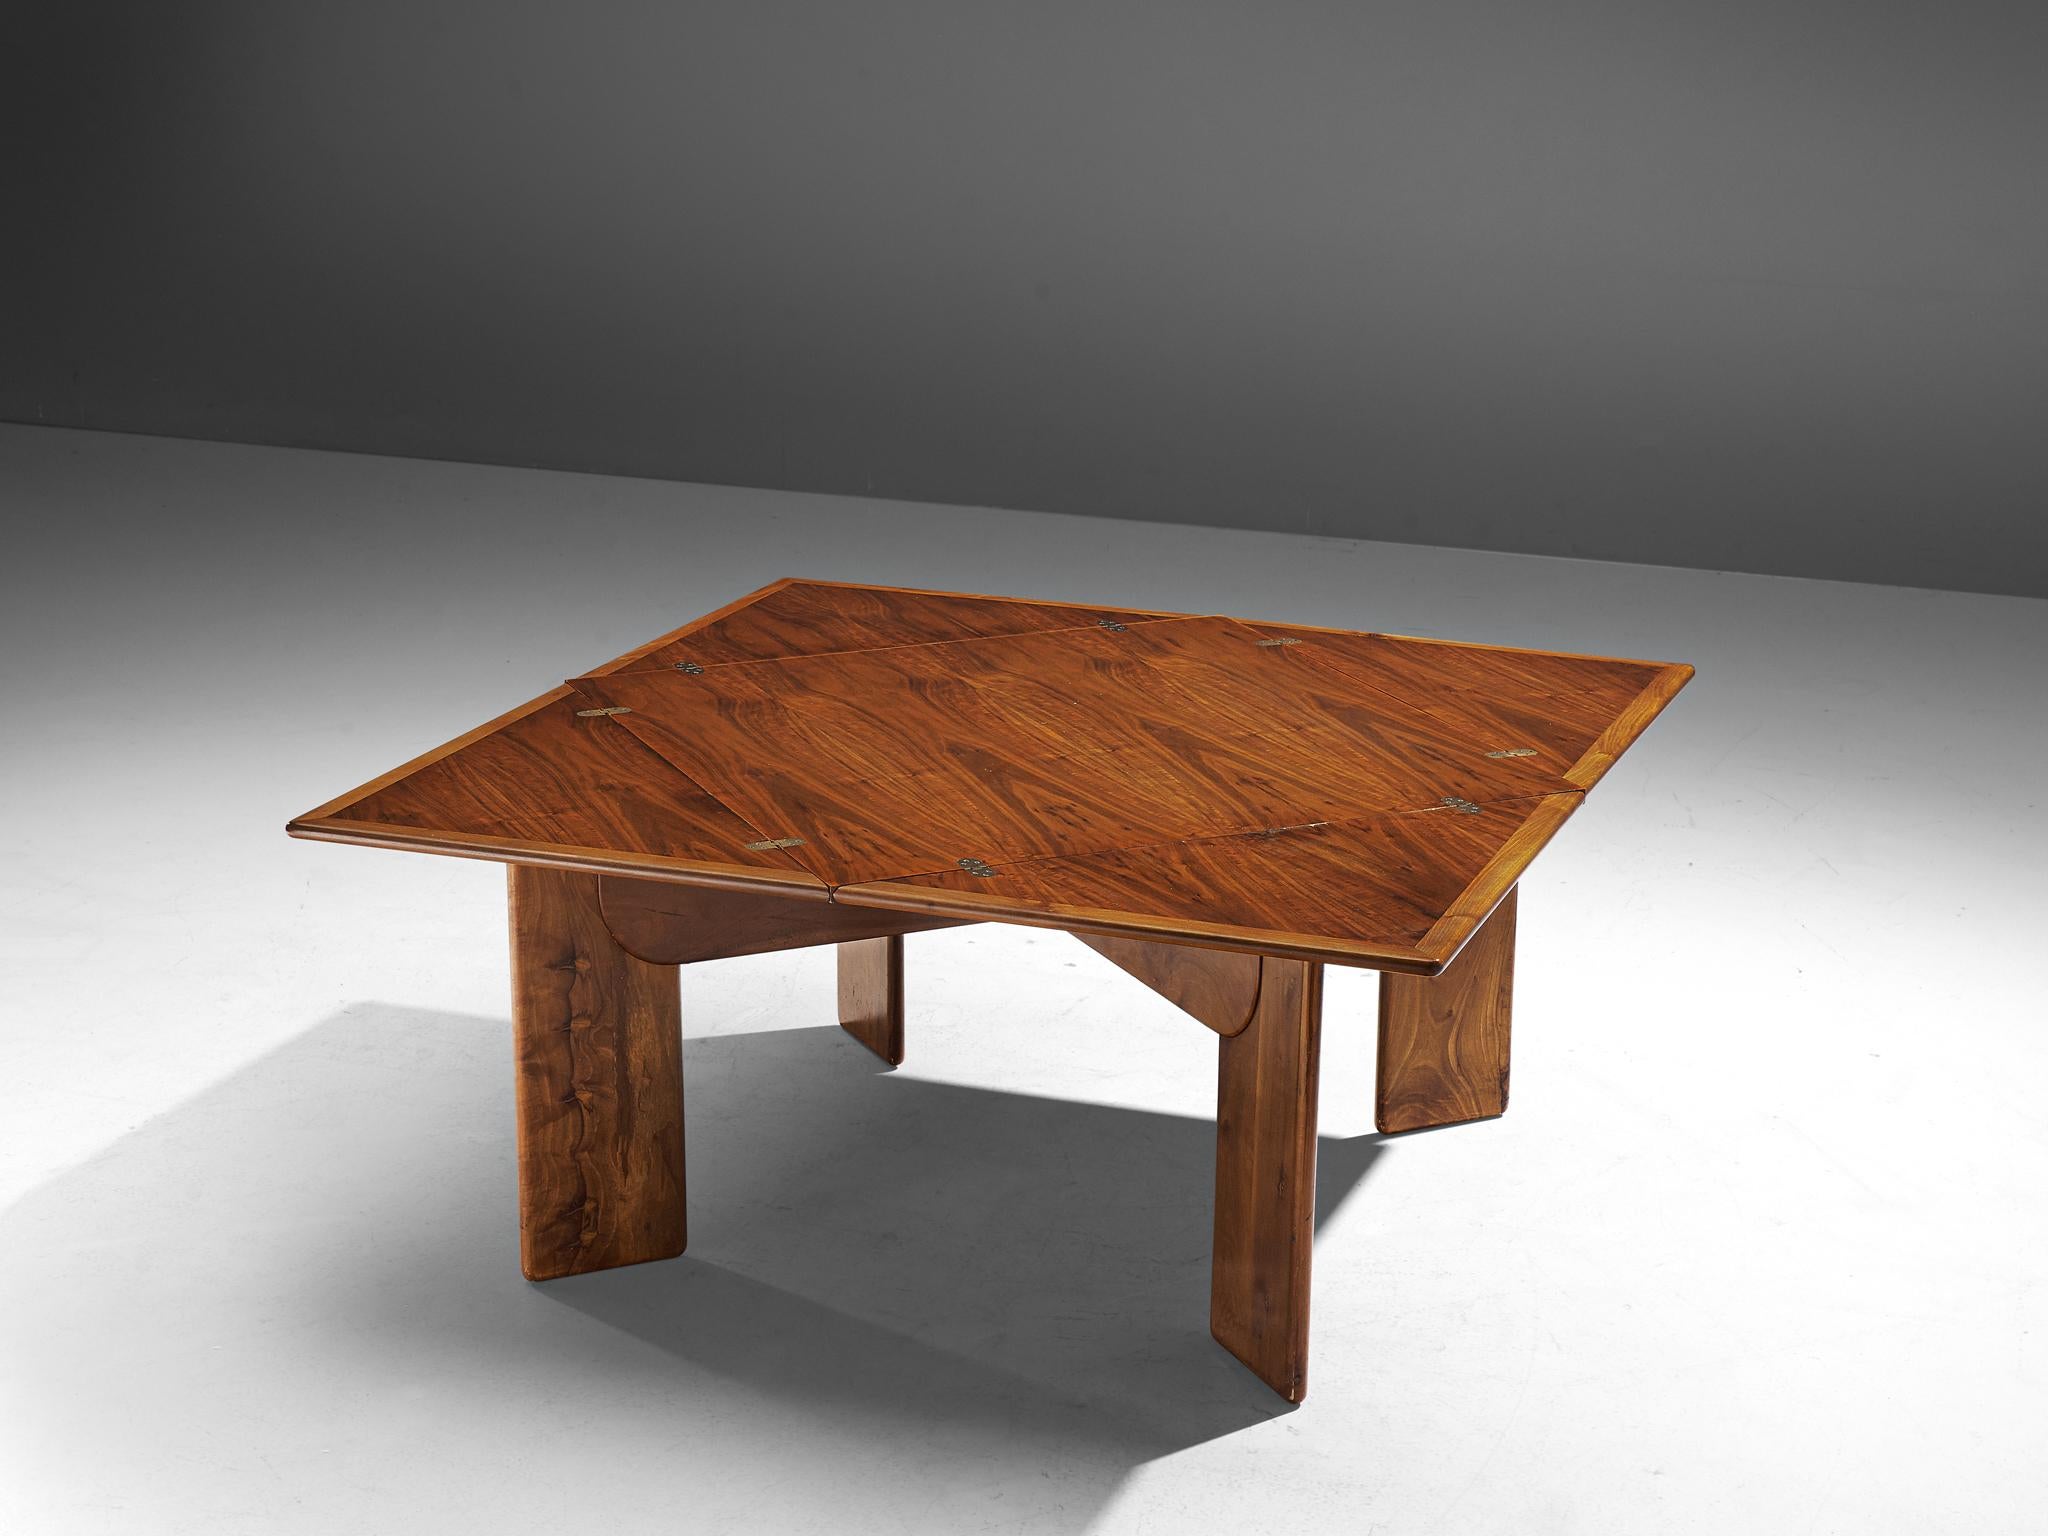 Silvio Coppola for Bernini, dining table, walnut, brass, Italy, 1960s. 

Stunning square shaped dining table with a flap tabletop. This dining table is made in beautiful walnut wood, featuring striking, warm tones in the grain. Therefore, the walnut